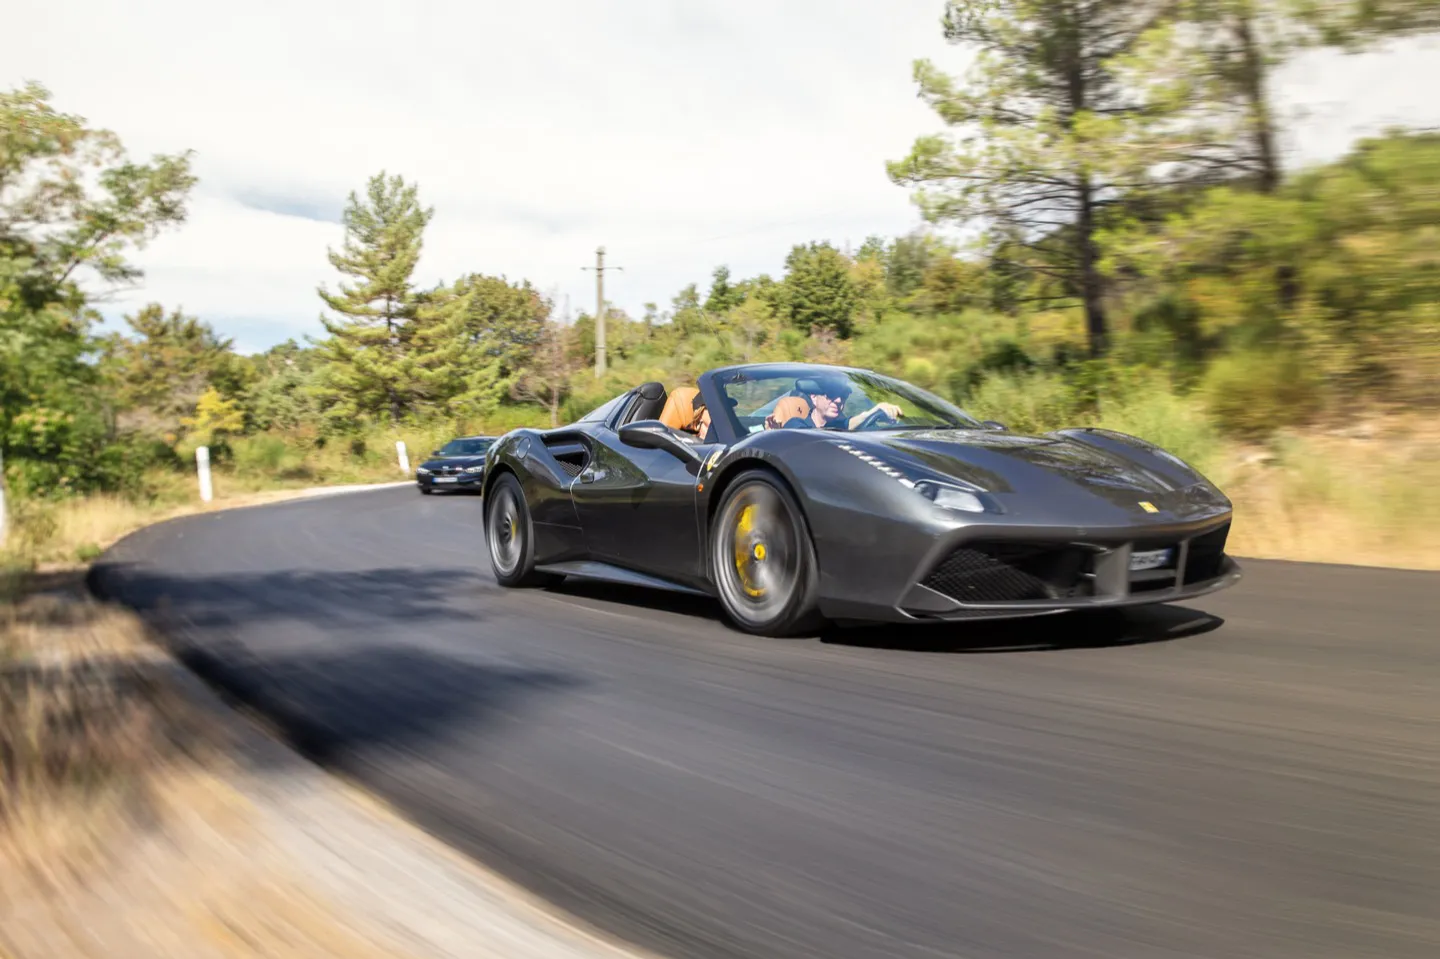 Explore the best roads of Provence and the French Riviera in a Ferrari